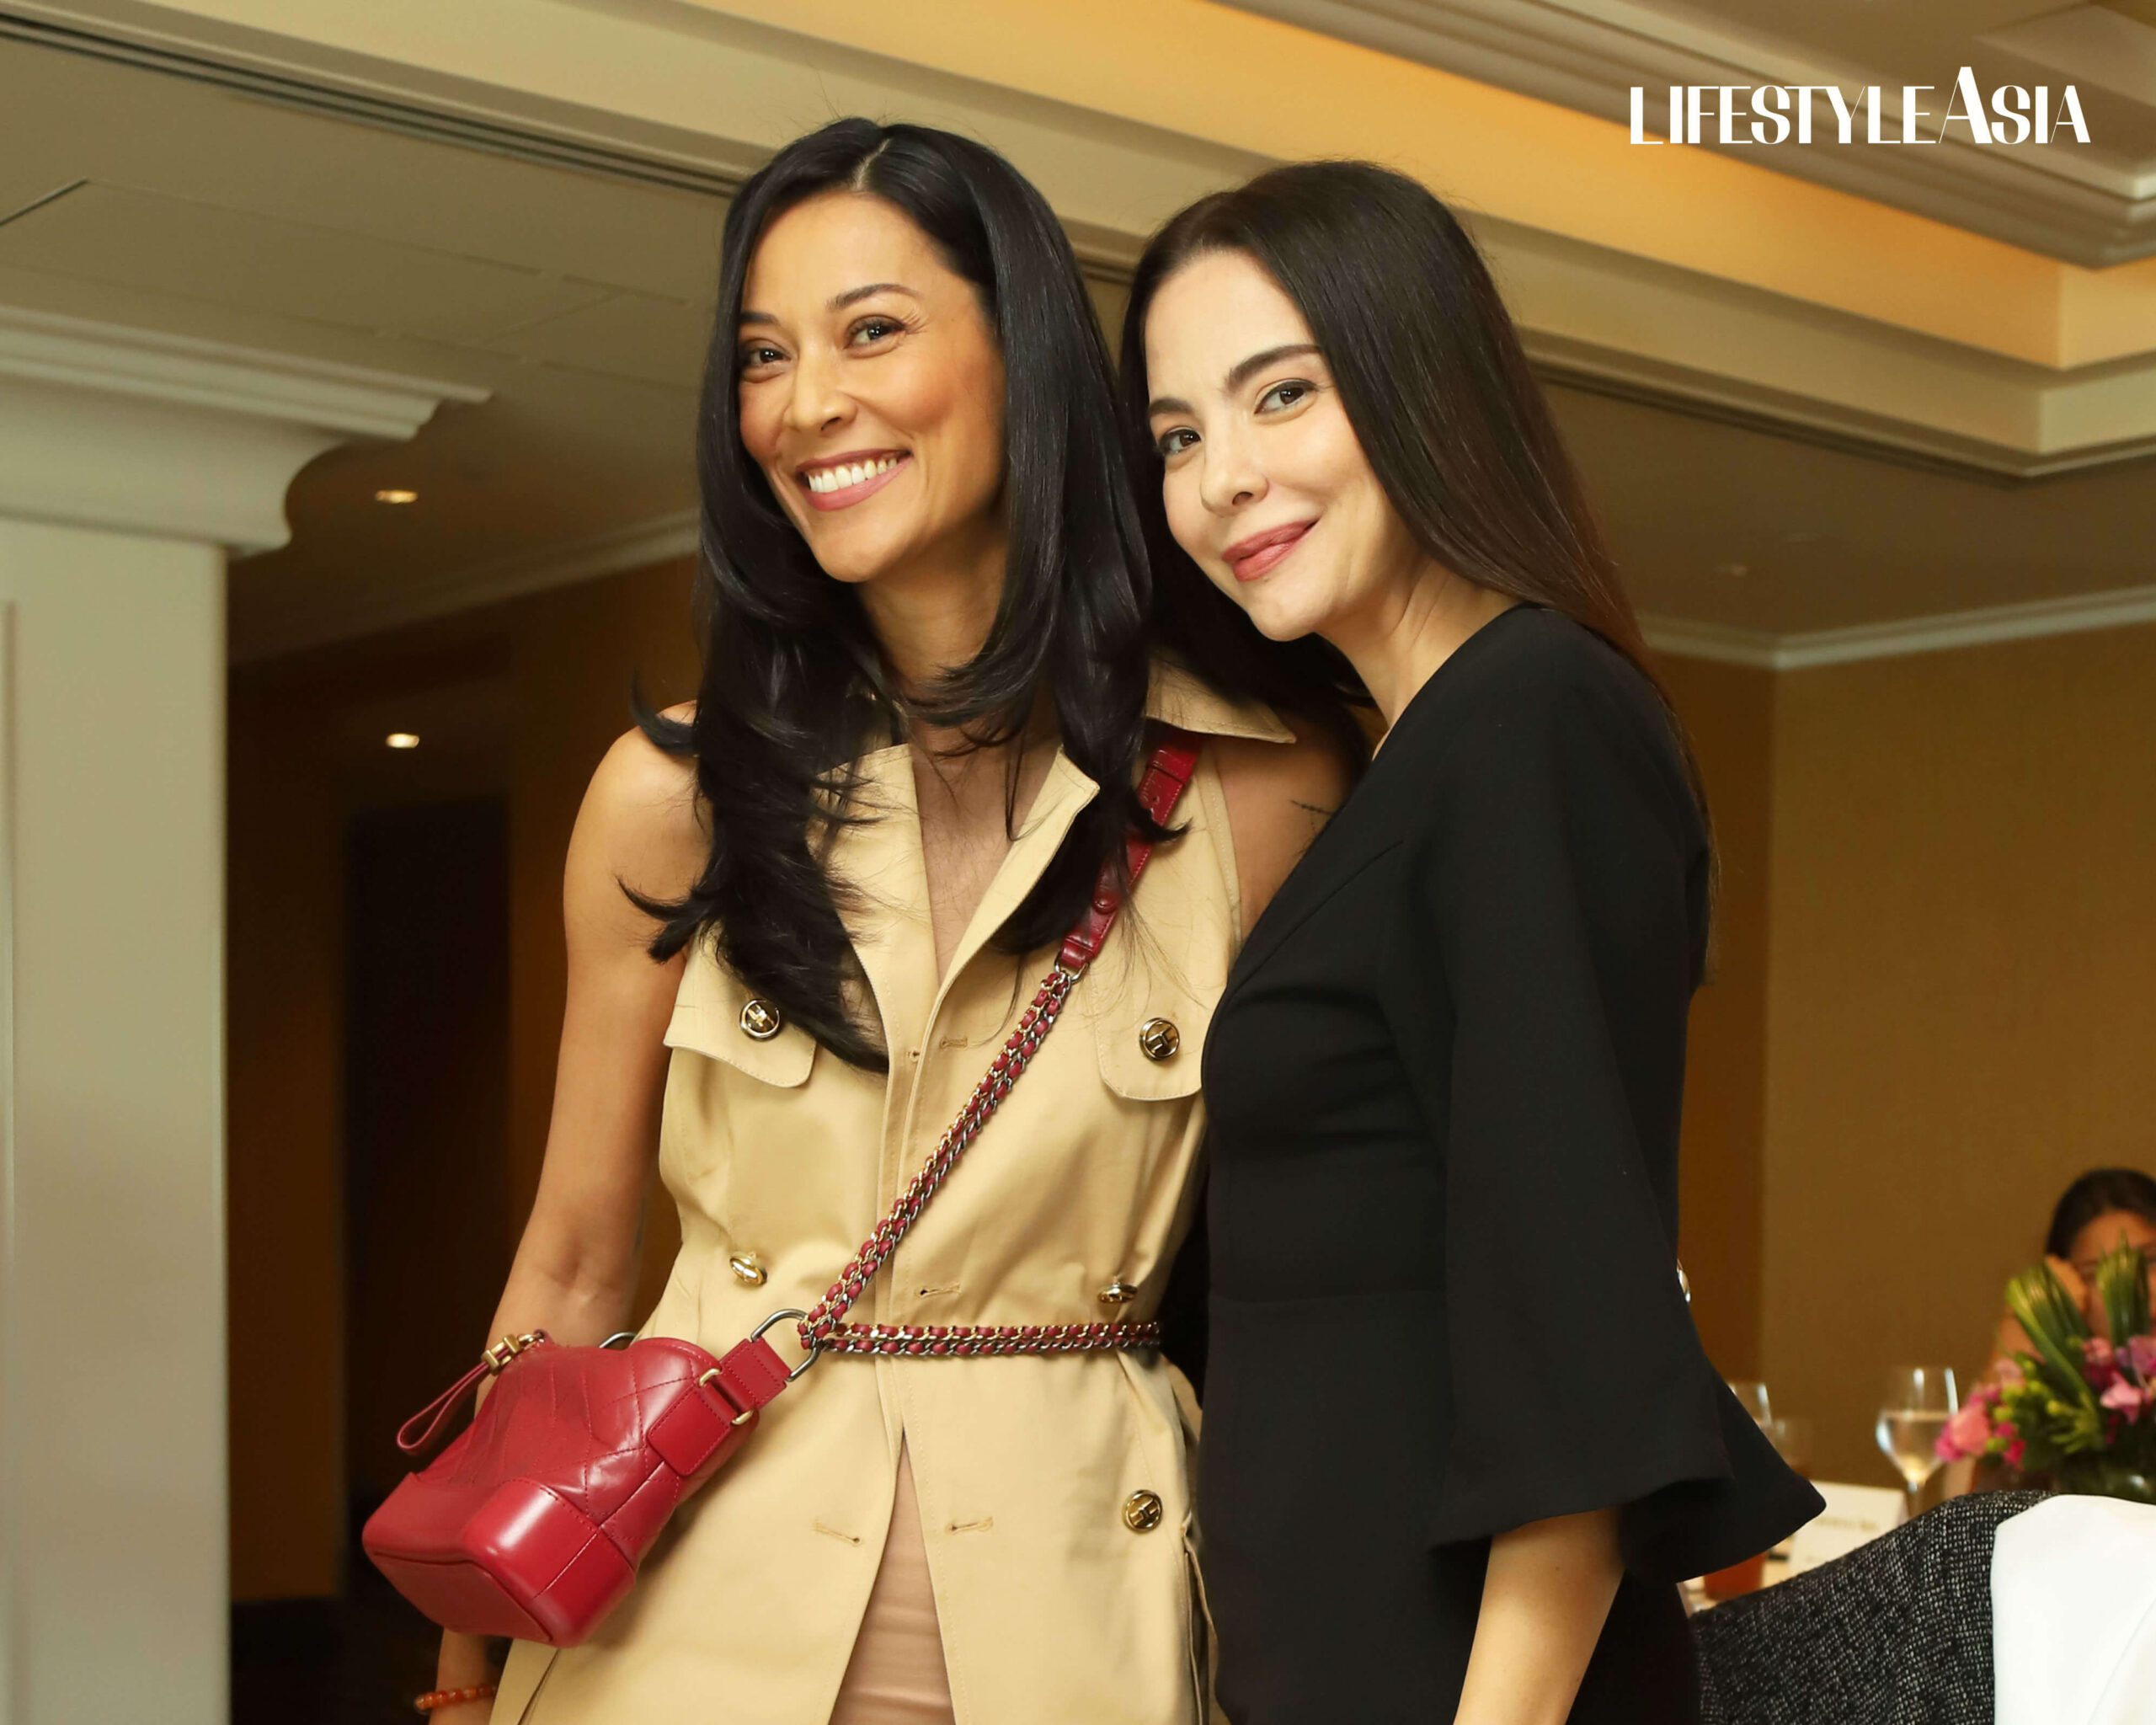 Joey Mead King and Amanda Griffin Jacob at Lifestyle Asia event